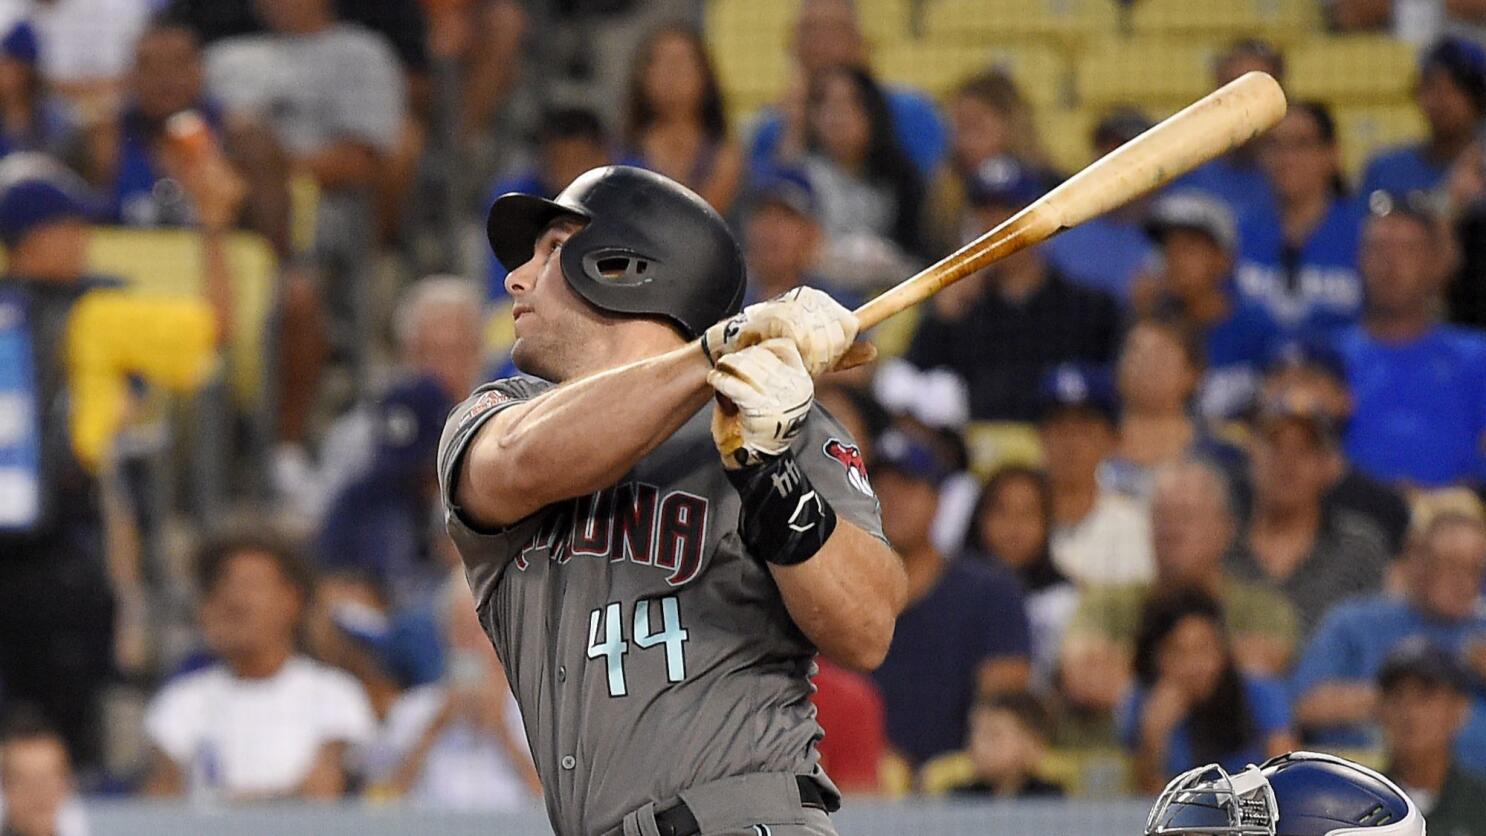 Paul Goldschmidt leaves NL West — and Dodgers path to a 7th